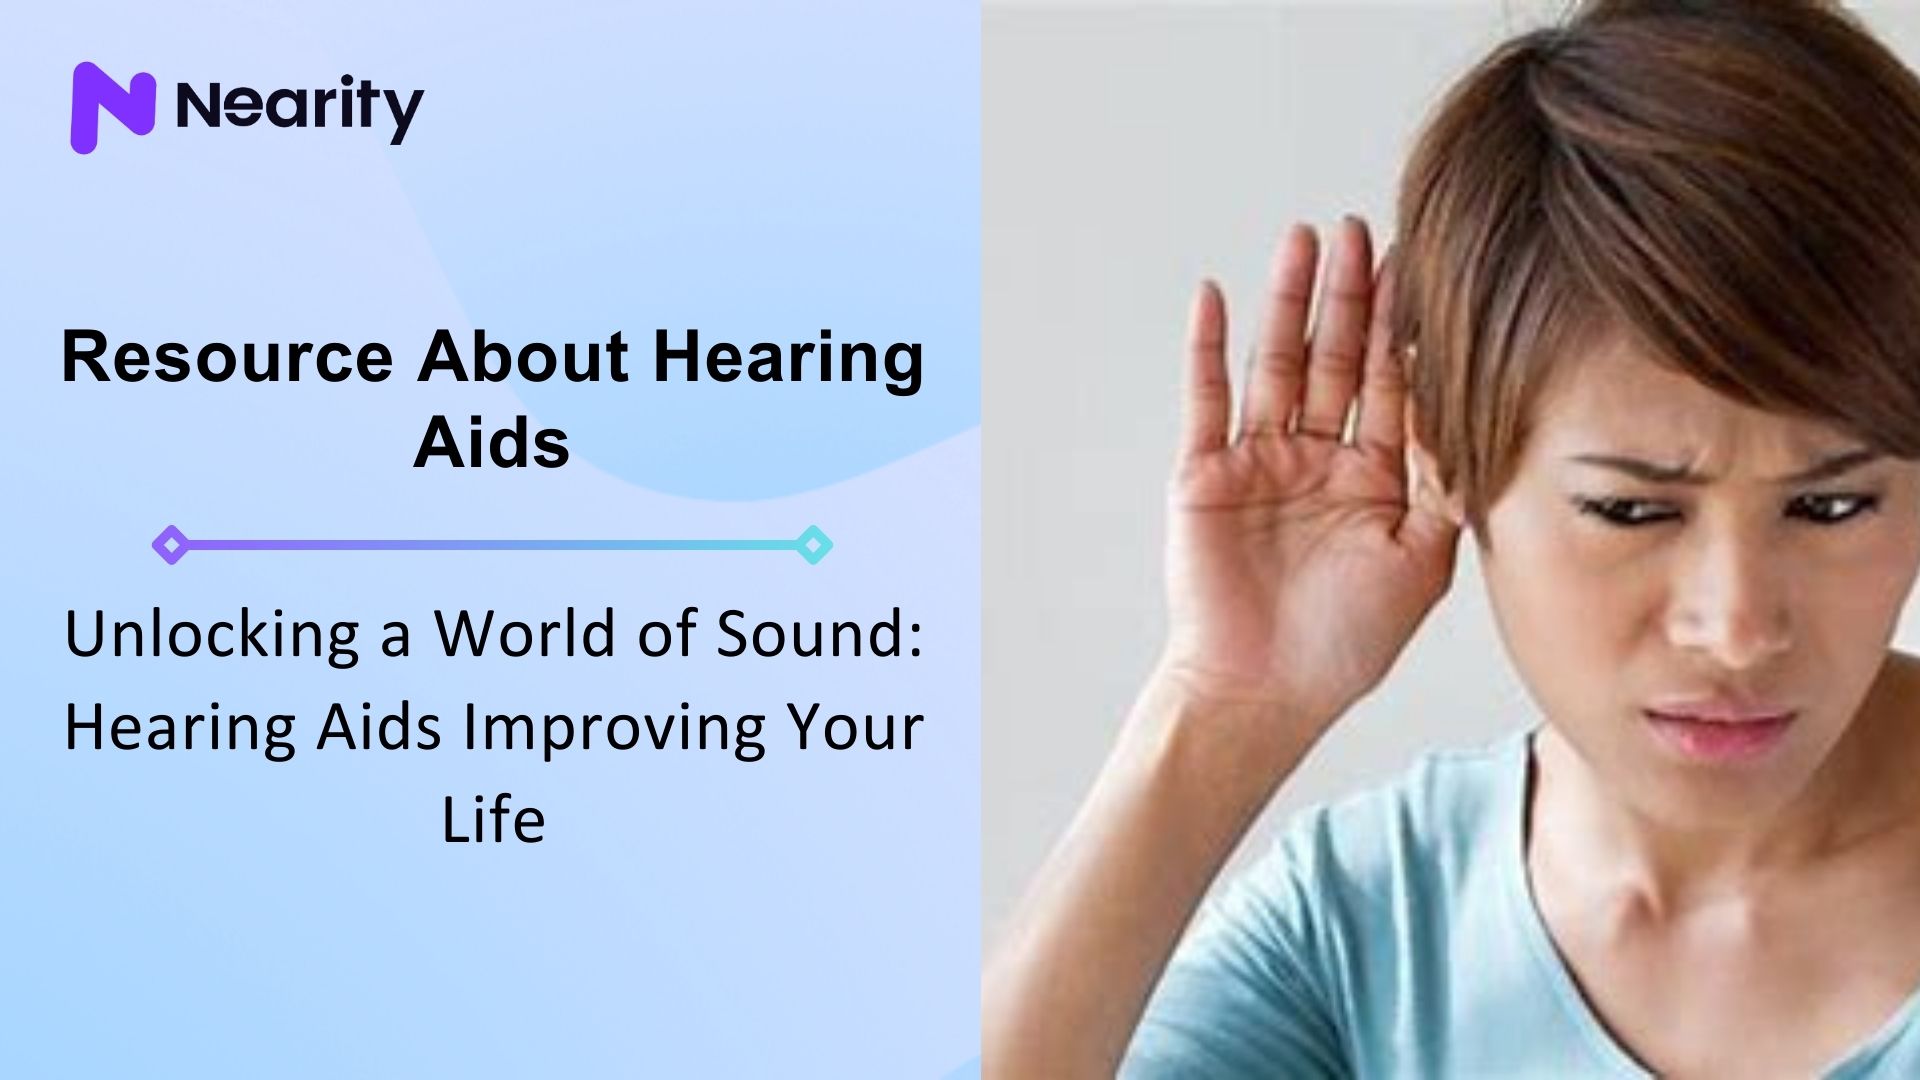 Unlocking a World of Sound: Hearing Aids Improving Your Life